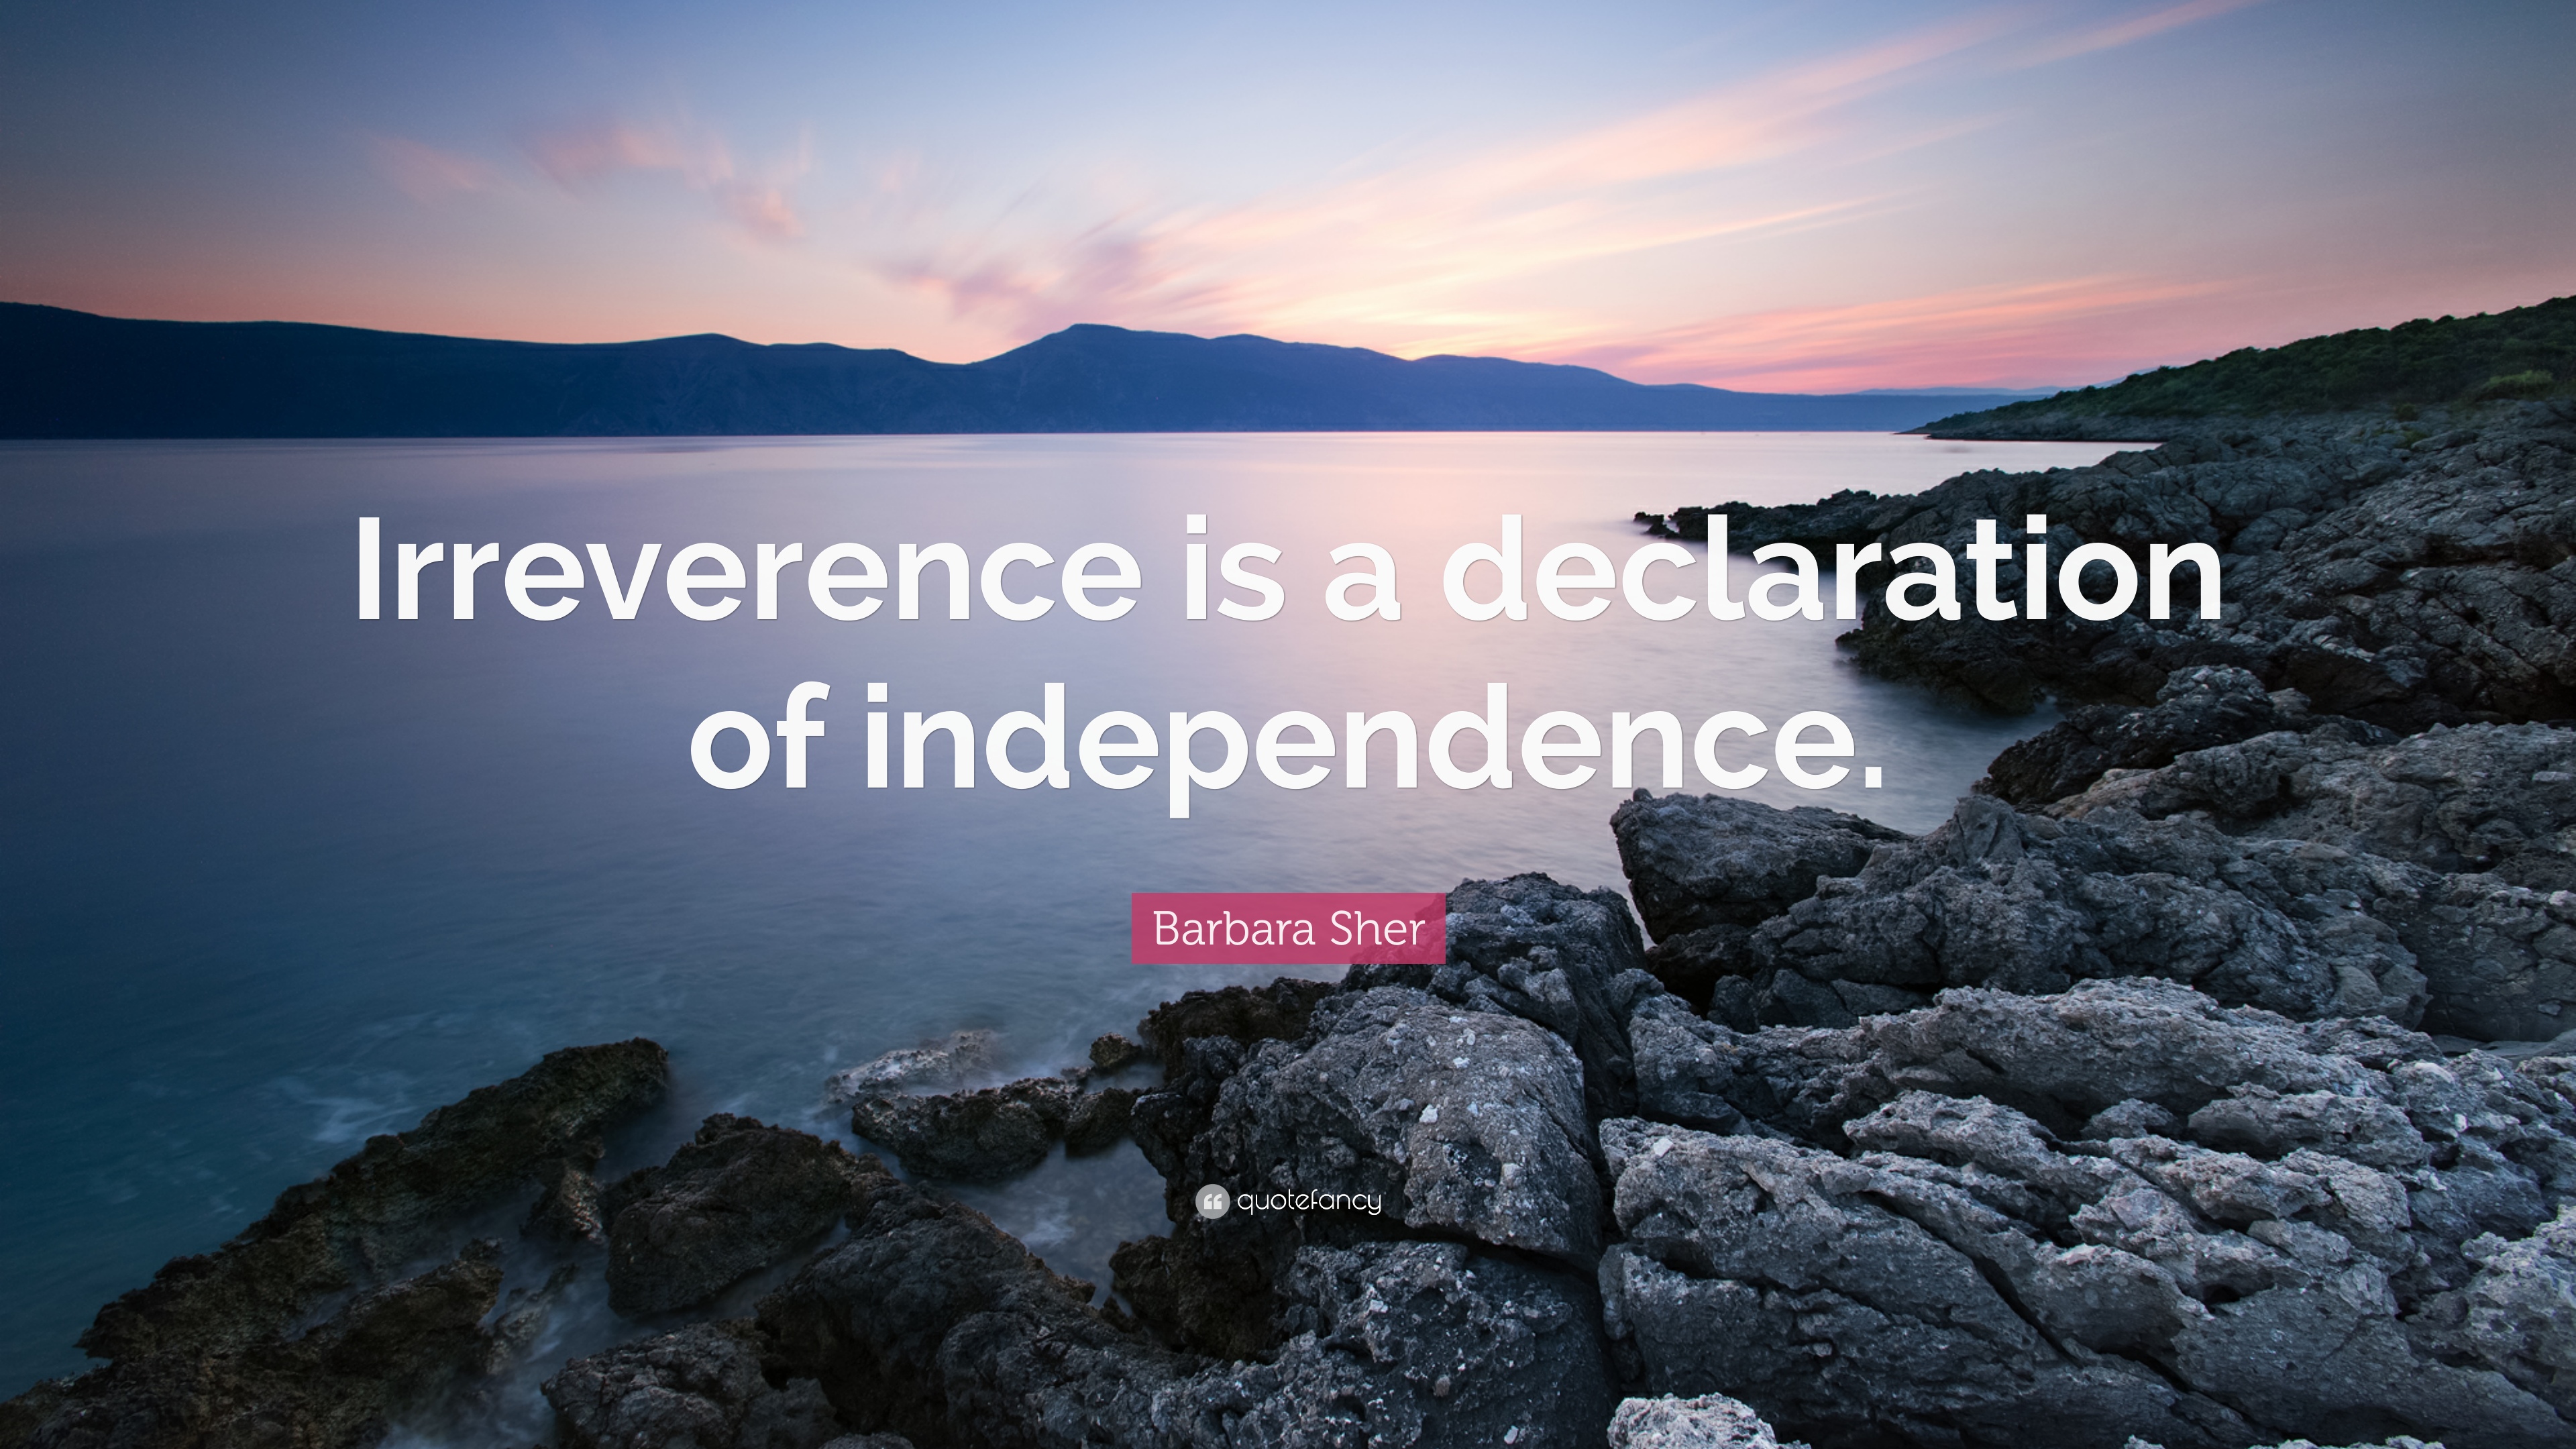 Barbara Sher Quote: “Irreverence is a declaration of independence